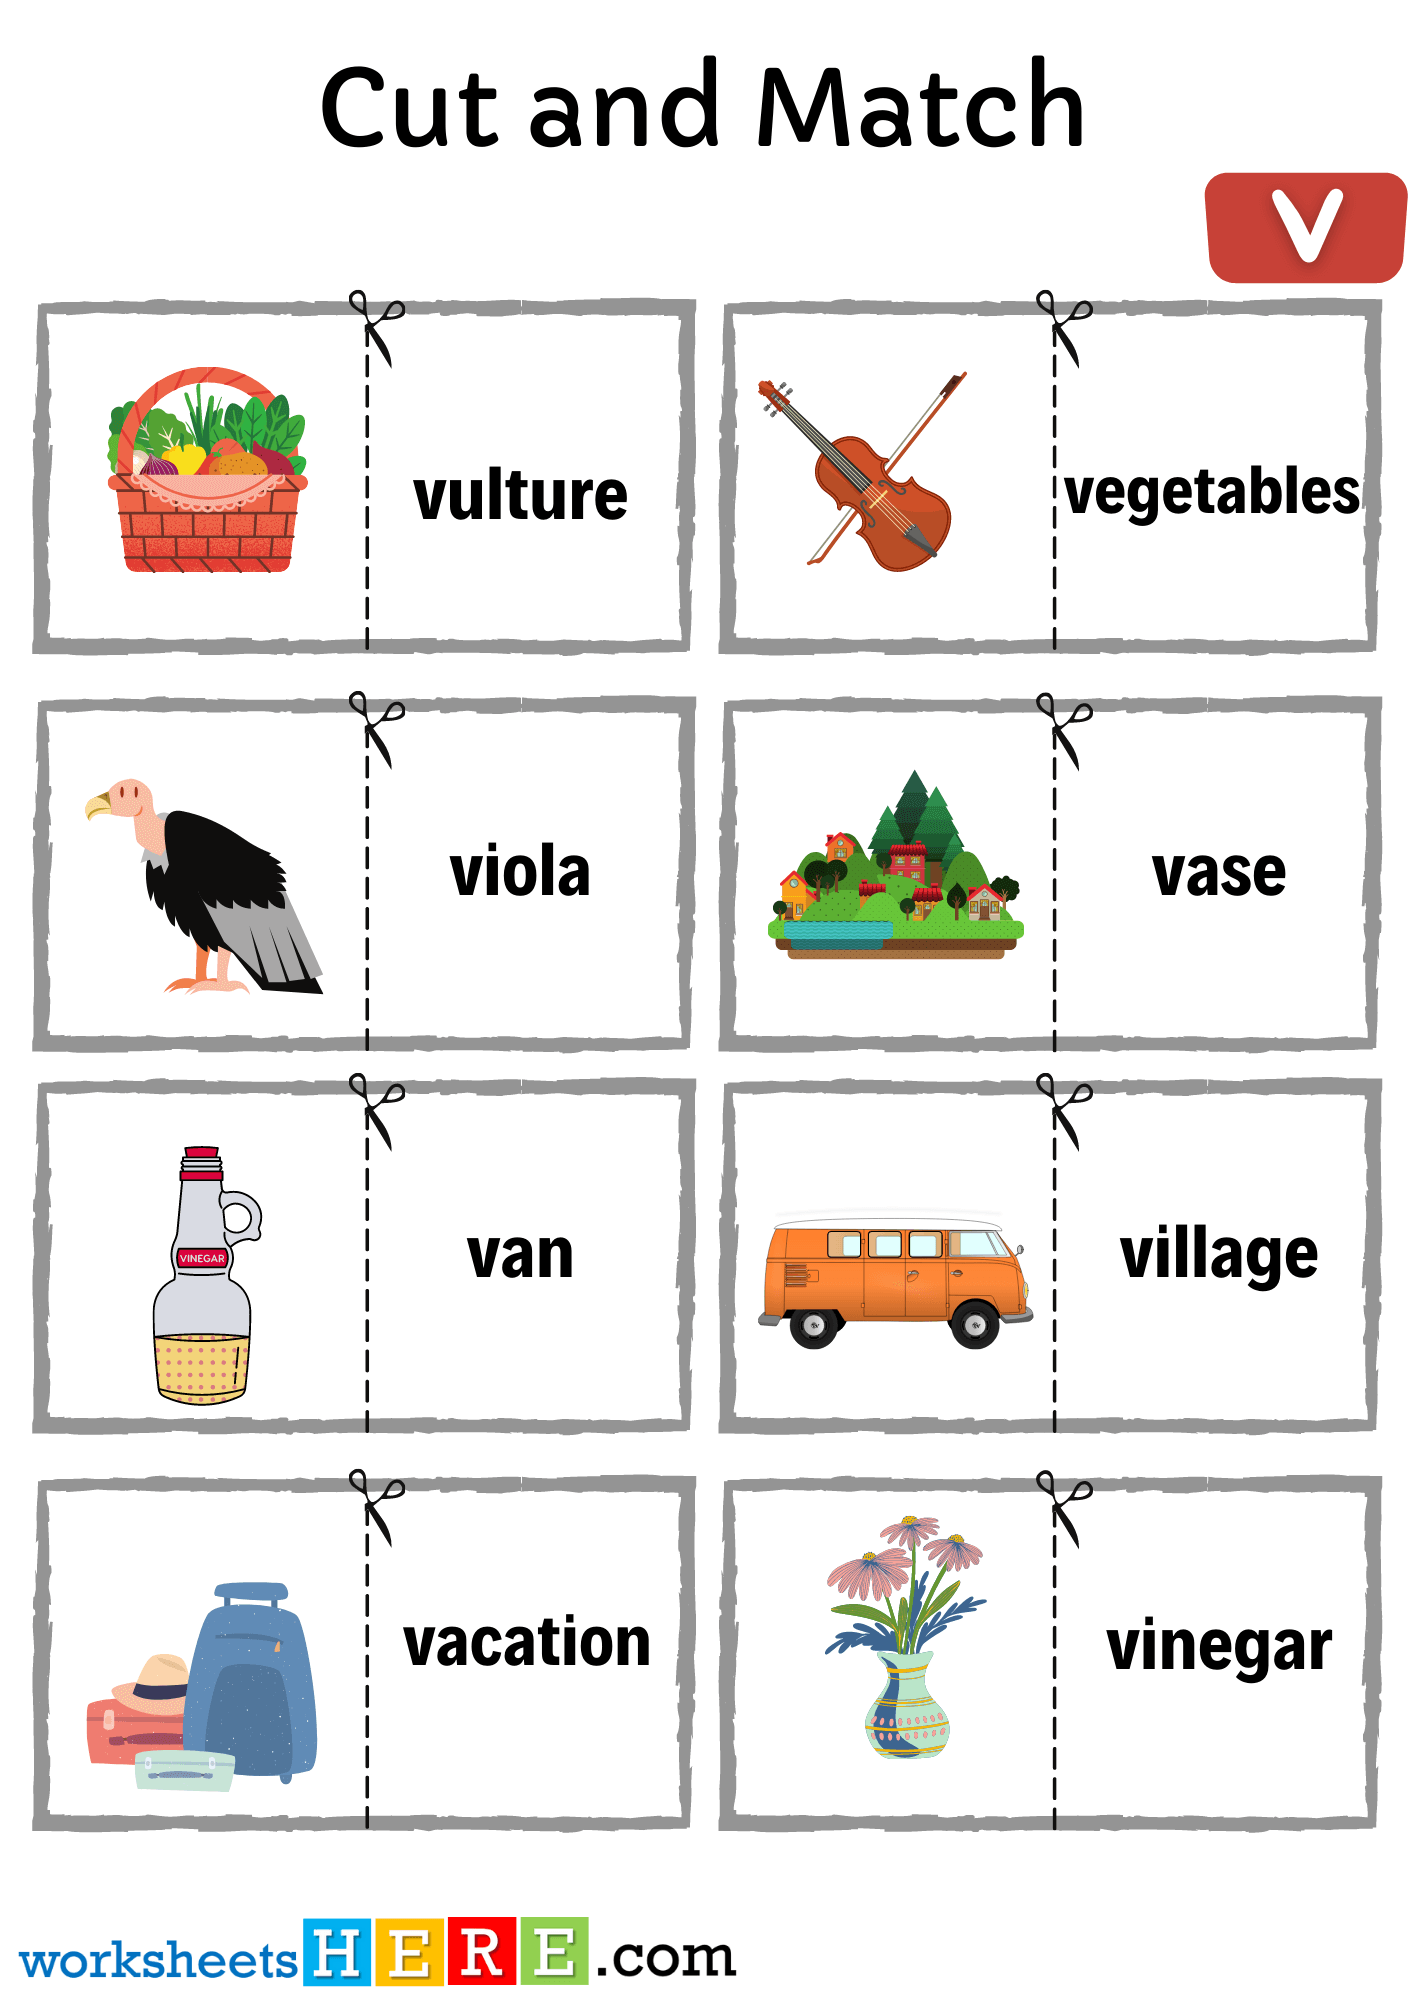 Cut and Match Alphabet Letter V with Pictures Activity Worksheets For Kids